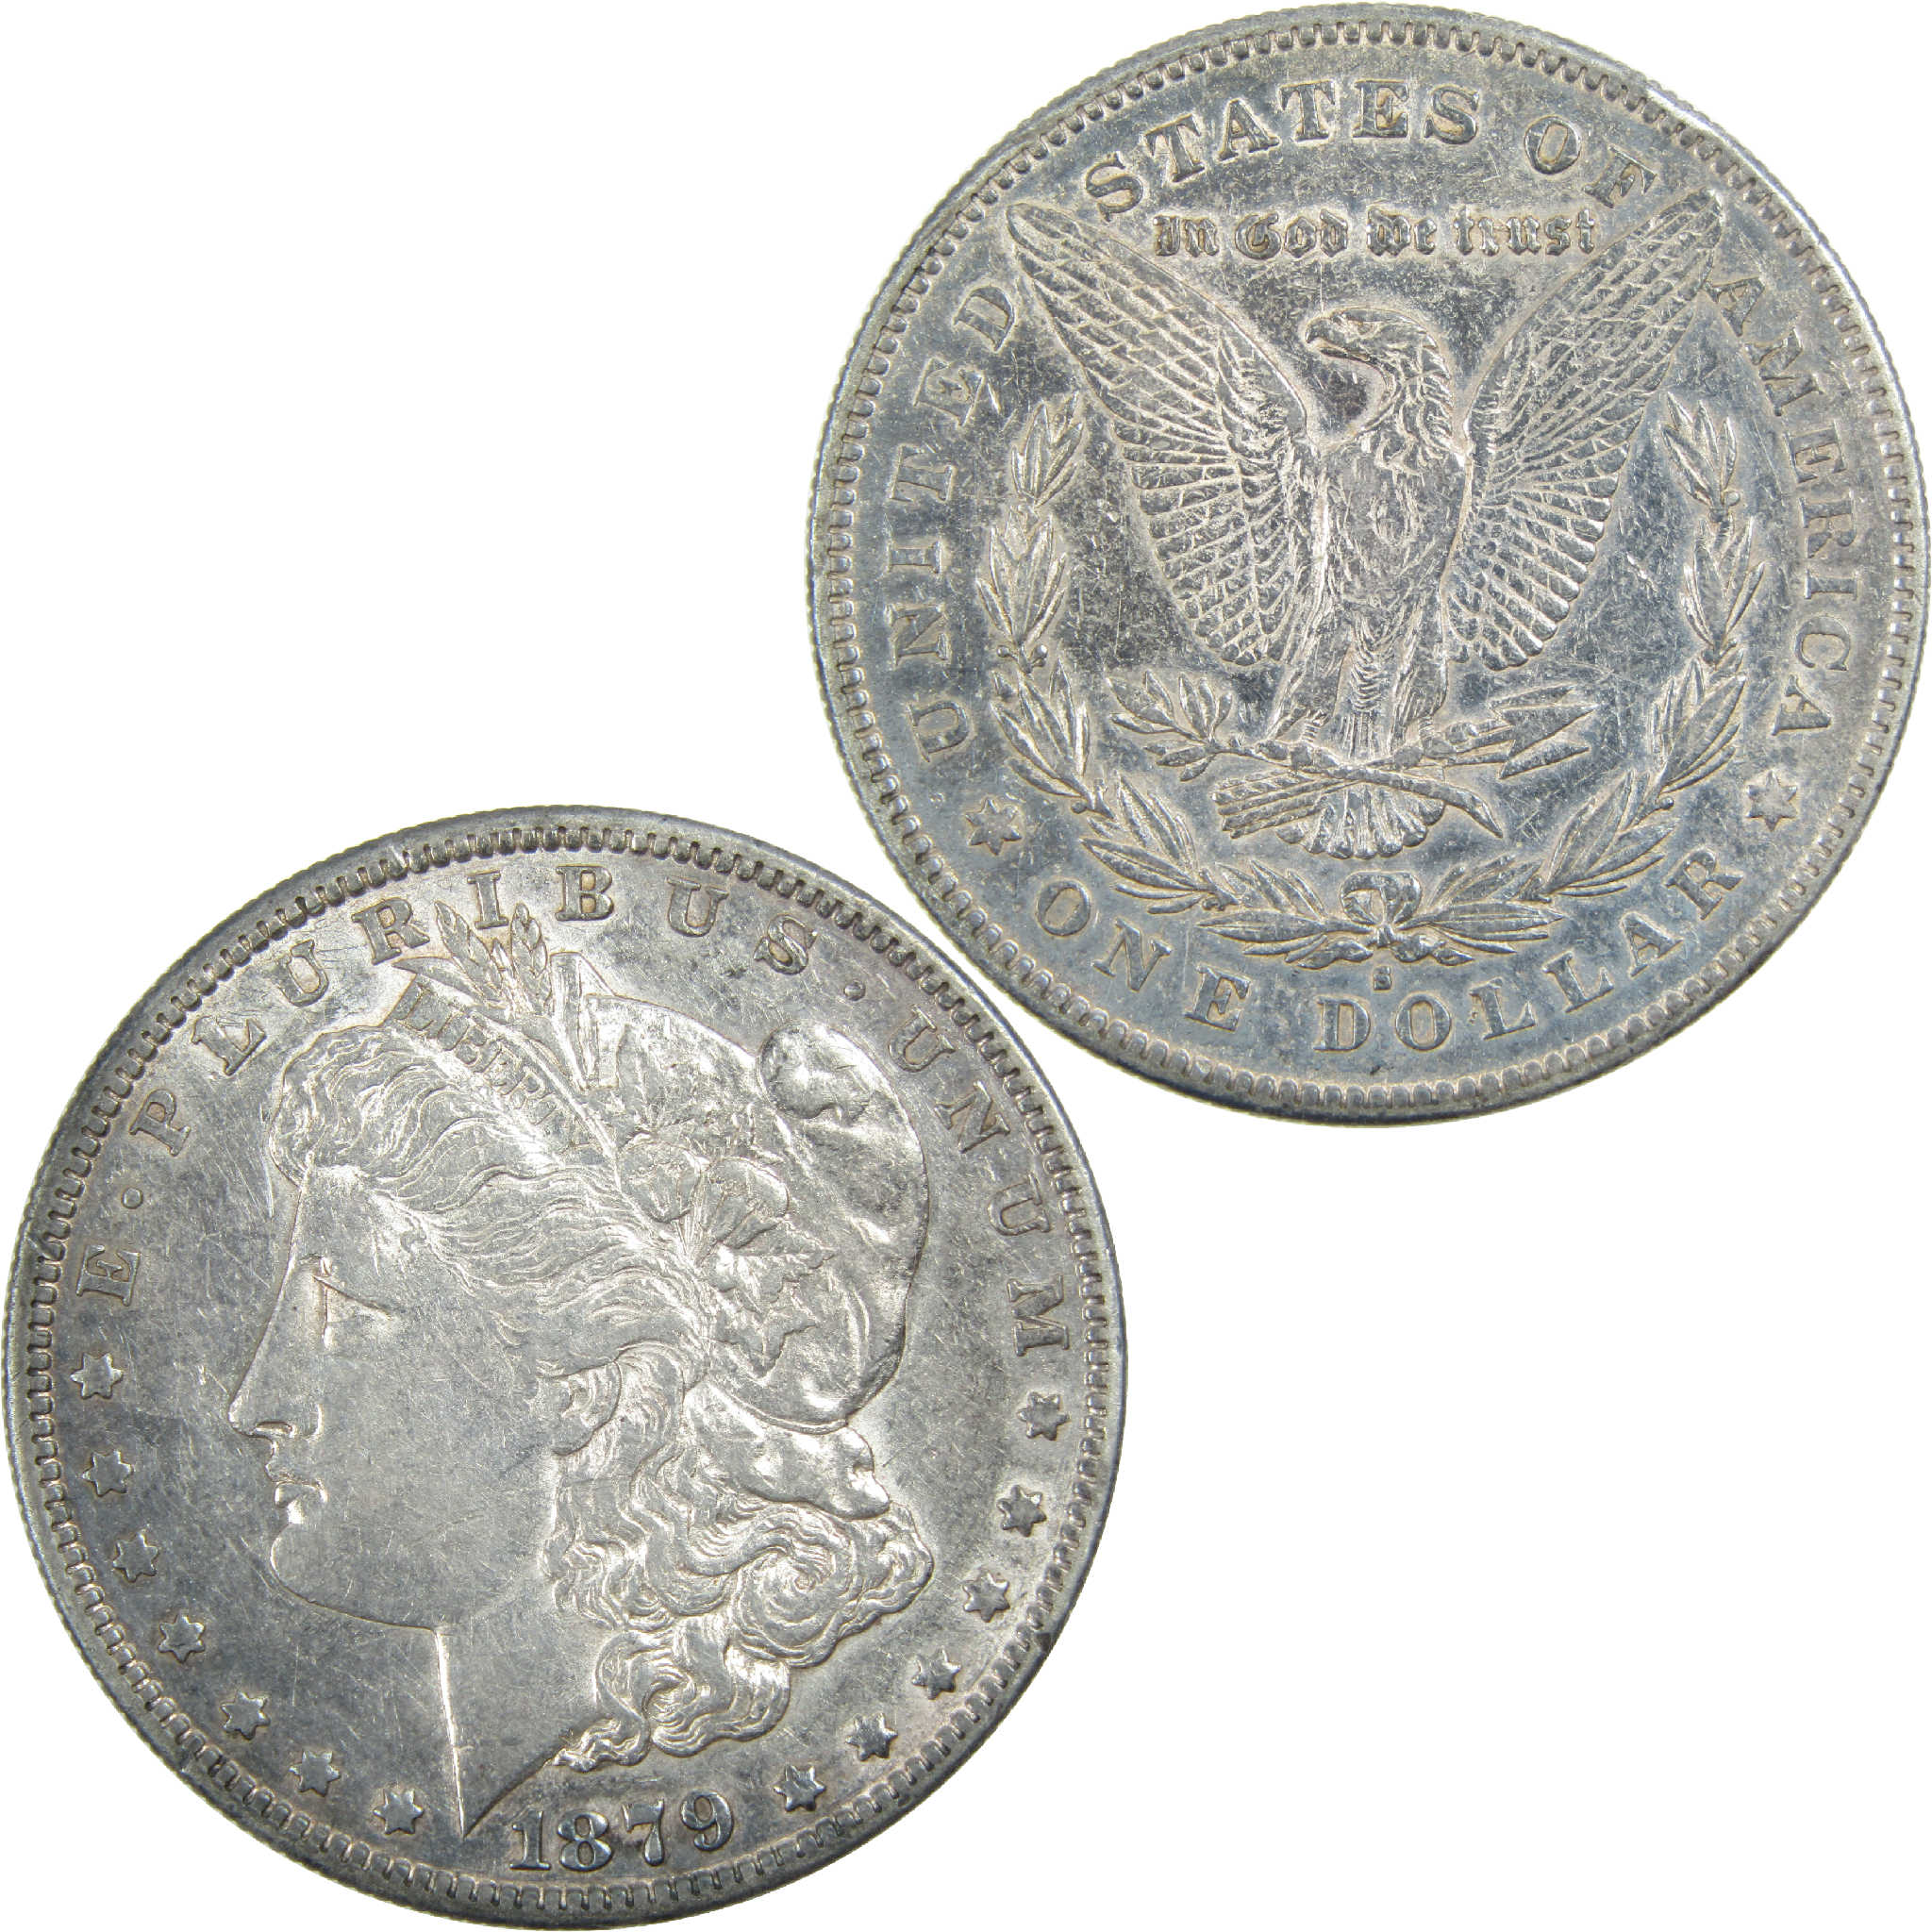 1879 S Rev 78 Morgan Dollar XF EF Extremely Fine Silver $1 SKU:I13596 - Morgan coin - Morgan silver dollar - Morgan silver dollar for sale - Profile Coins &amp; Collectibles